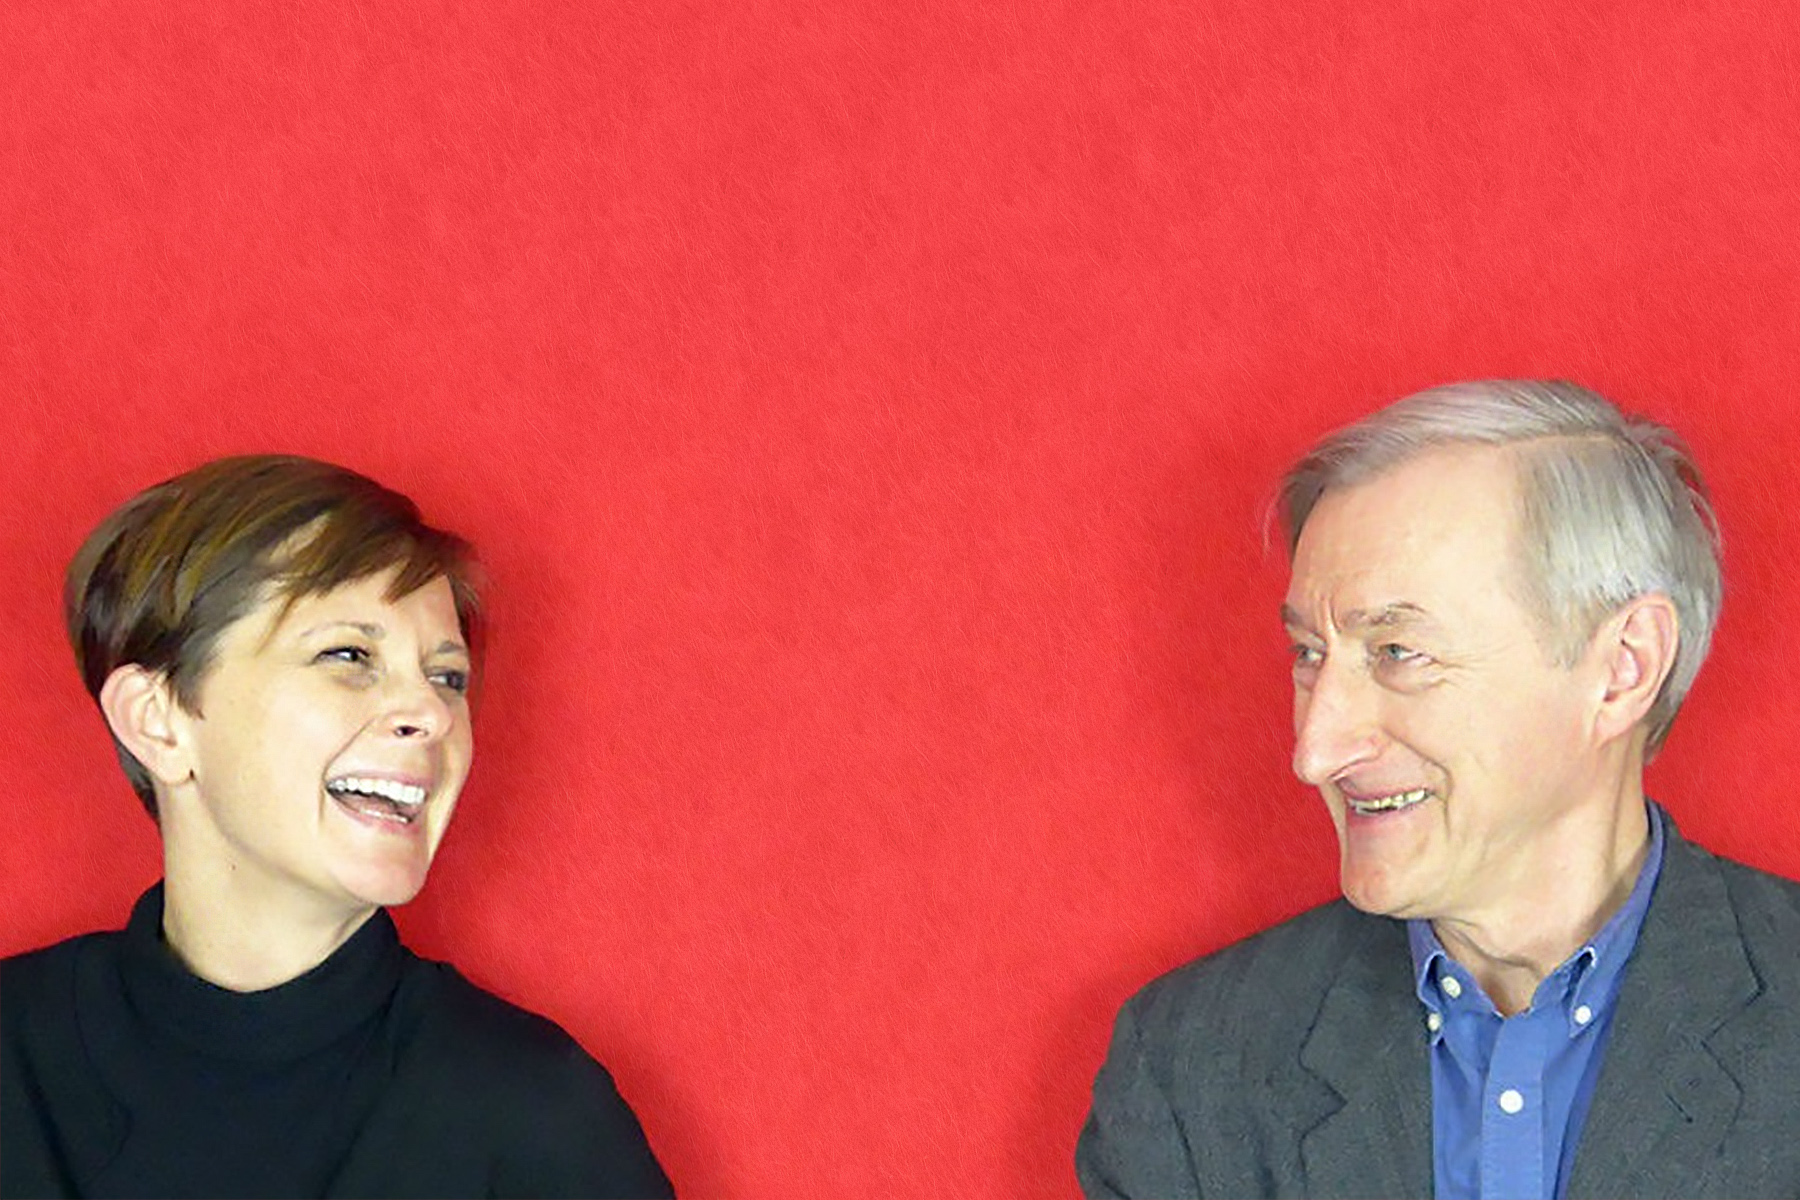 Photograph of Suzanne Dean and Julian Barnes from shoulders up, laughing to one another.